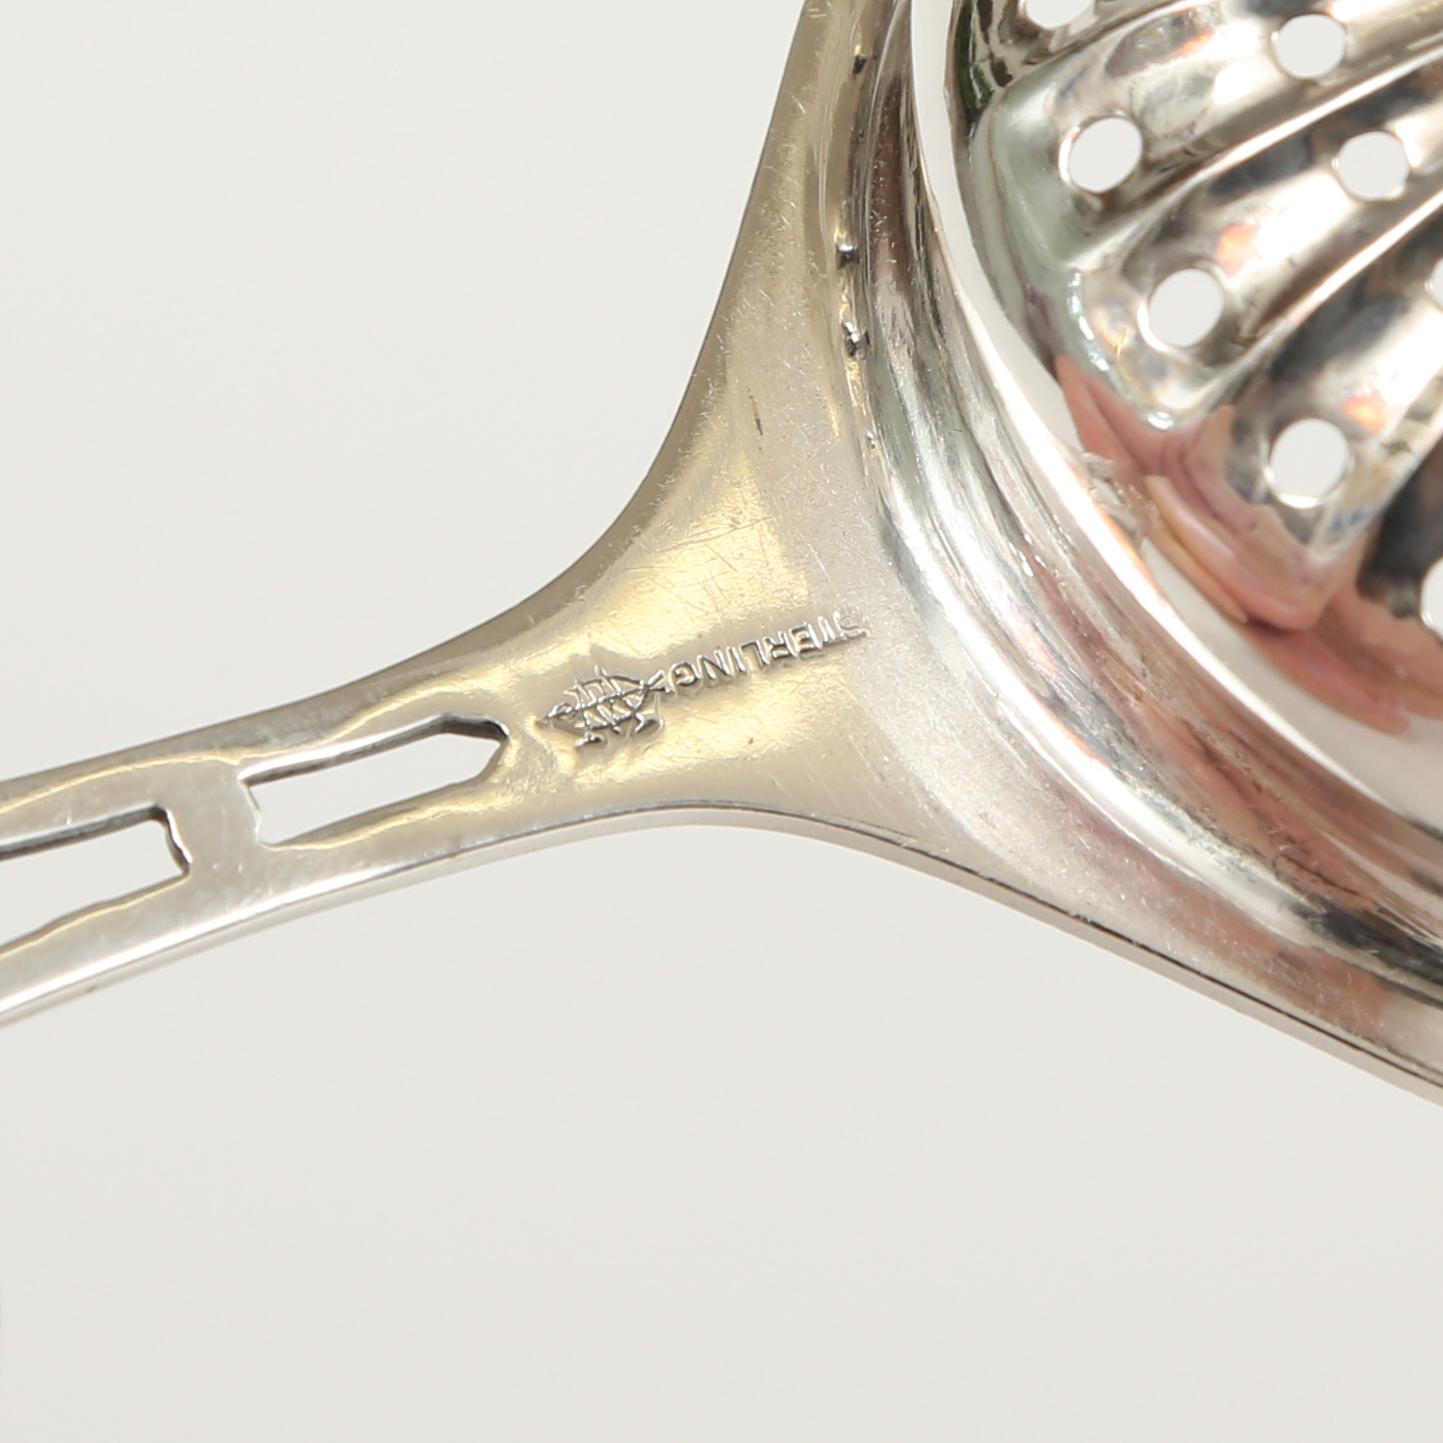 Sterling silver tea strainer by Webster Silver Company. The interesting feature here is that the handle is shaped like the back splat on a Chippendale chair. The Webster Silver Company was located in North Attleboro, Massachusetts and founded by